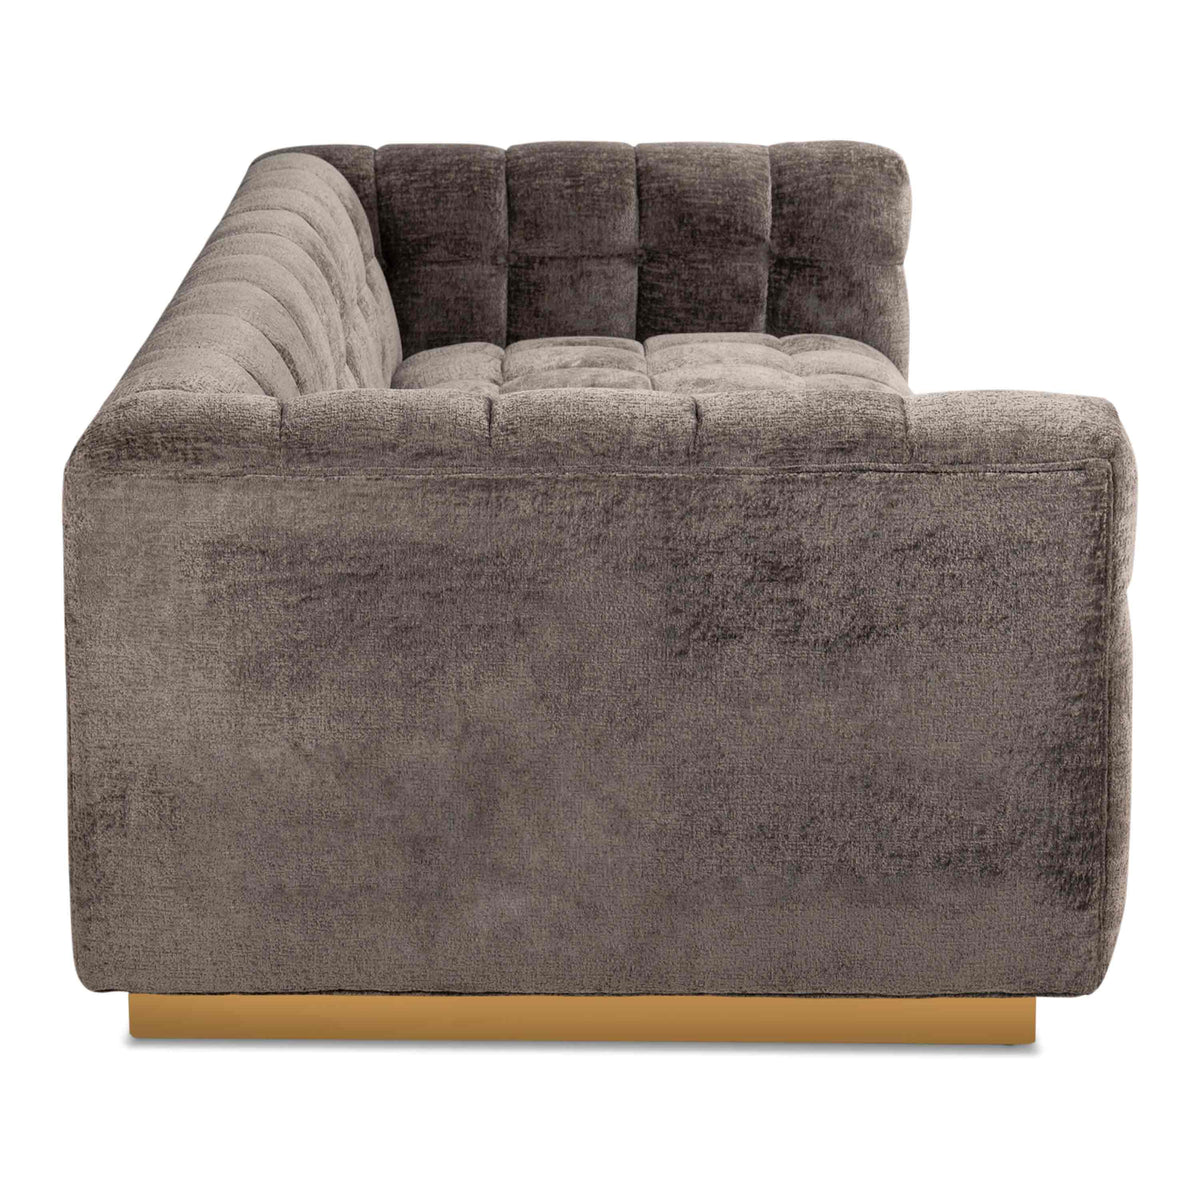 Extra Deep Delano Sofa in Hammered Velour